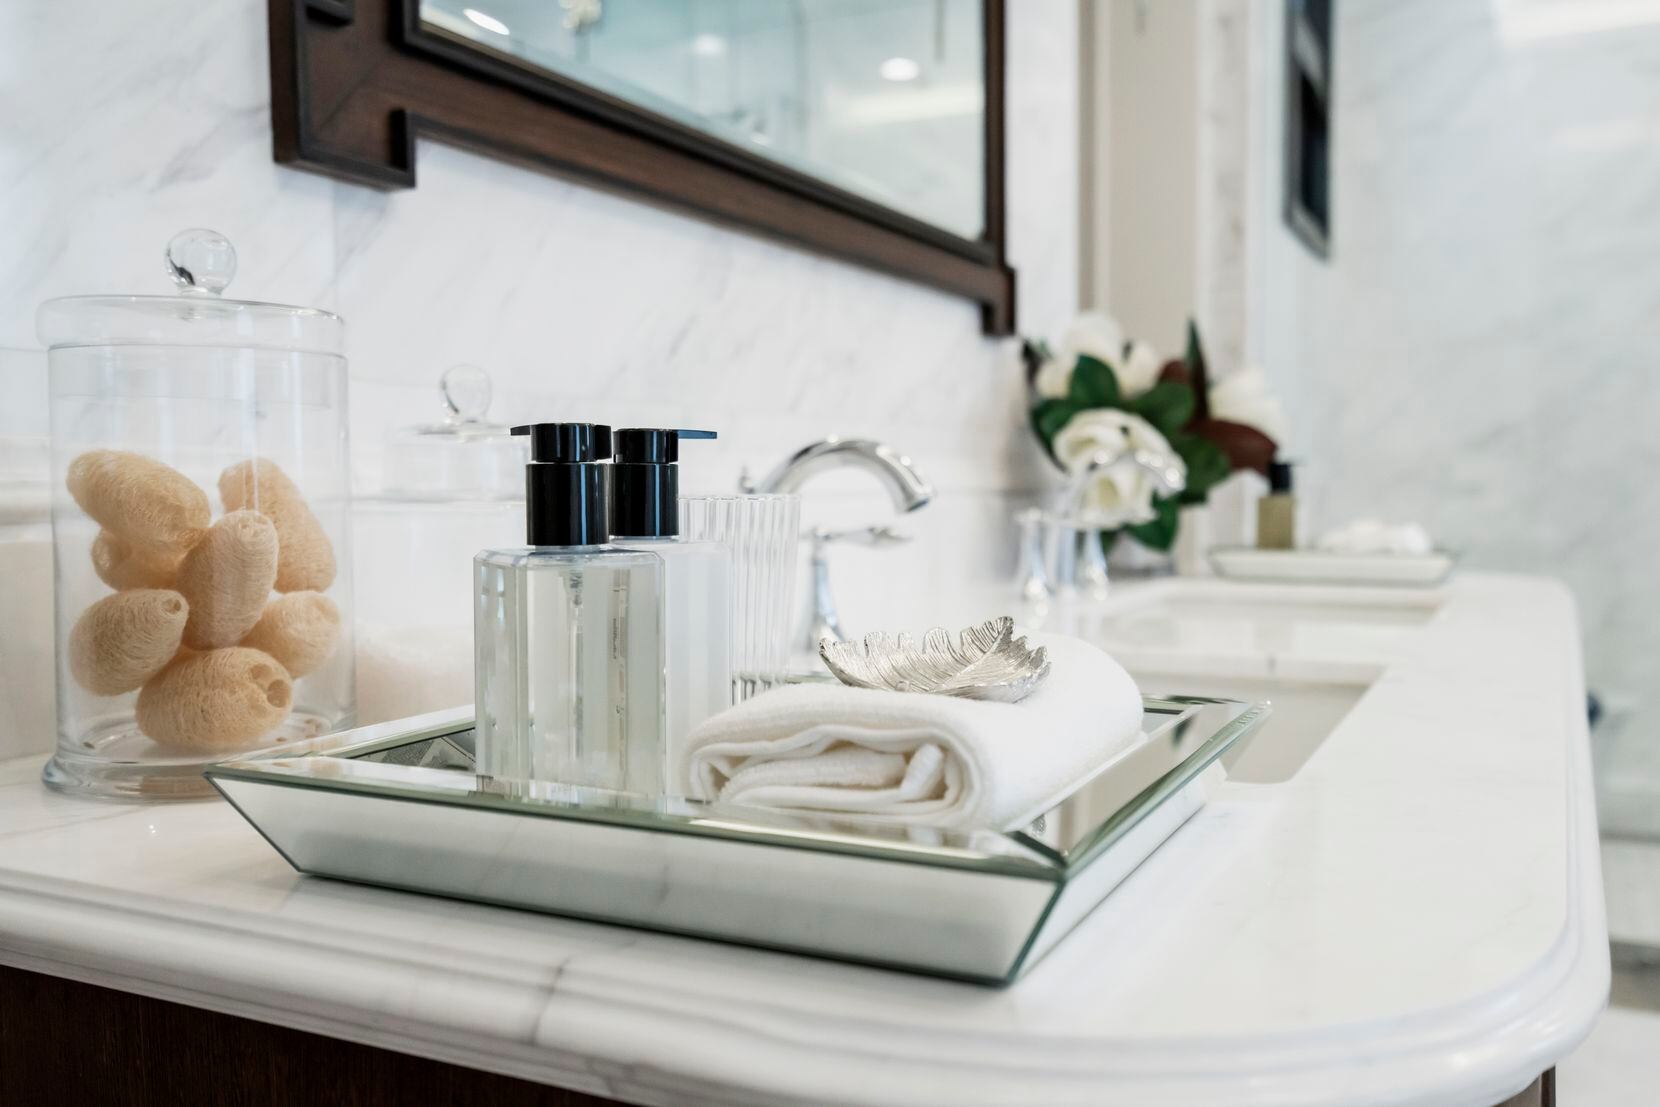 How to Decorate Your Bathroom Counter Like a Pro